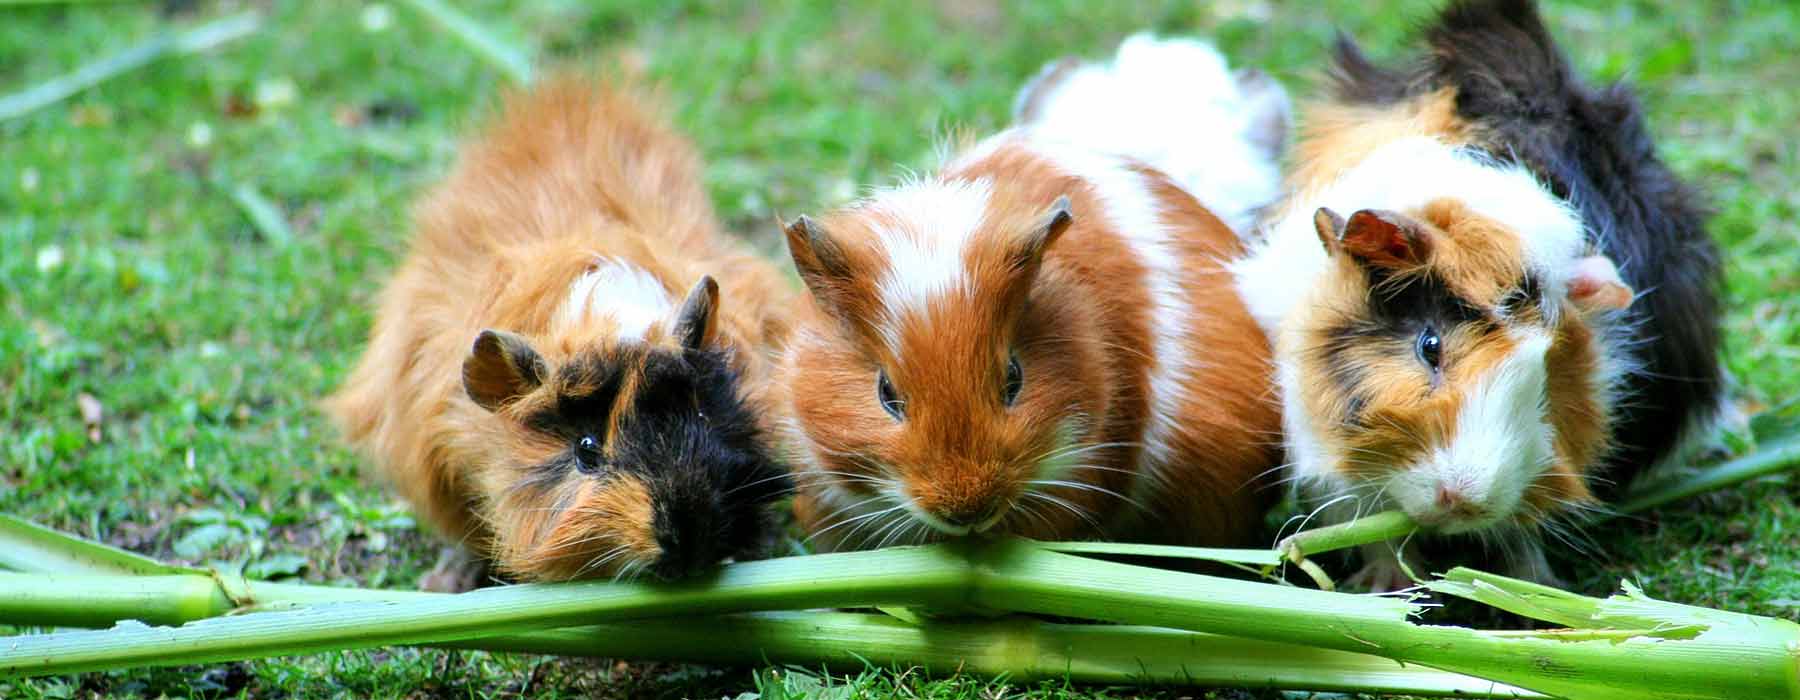 Guinea pigs outdoors on the grass, eating plants